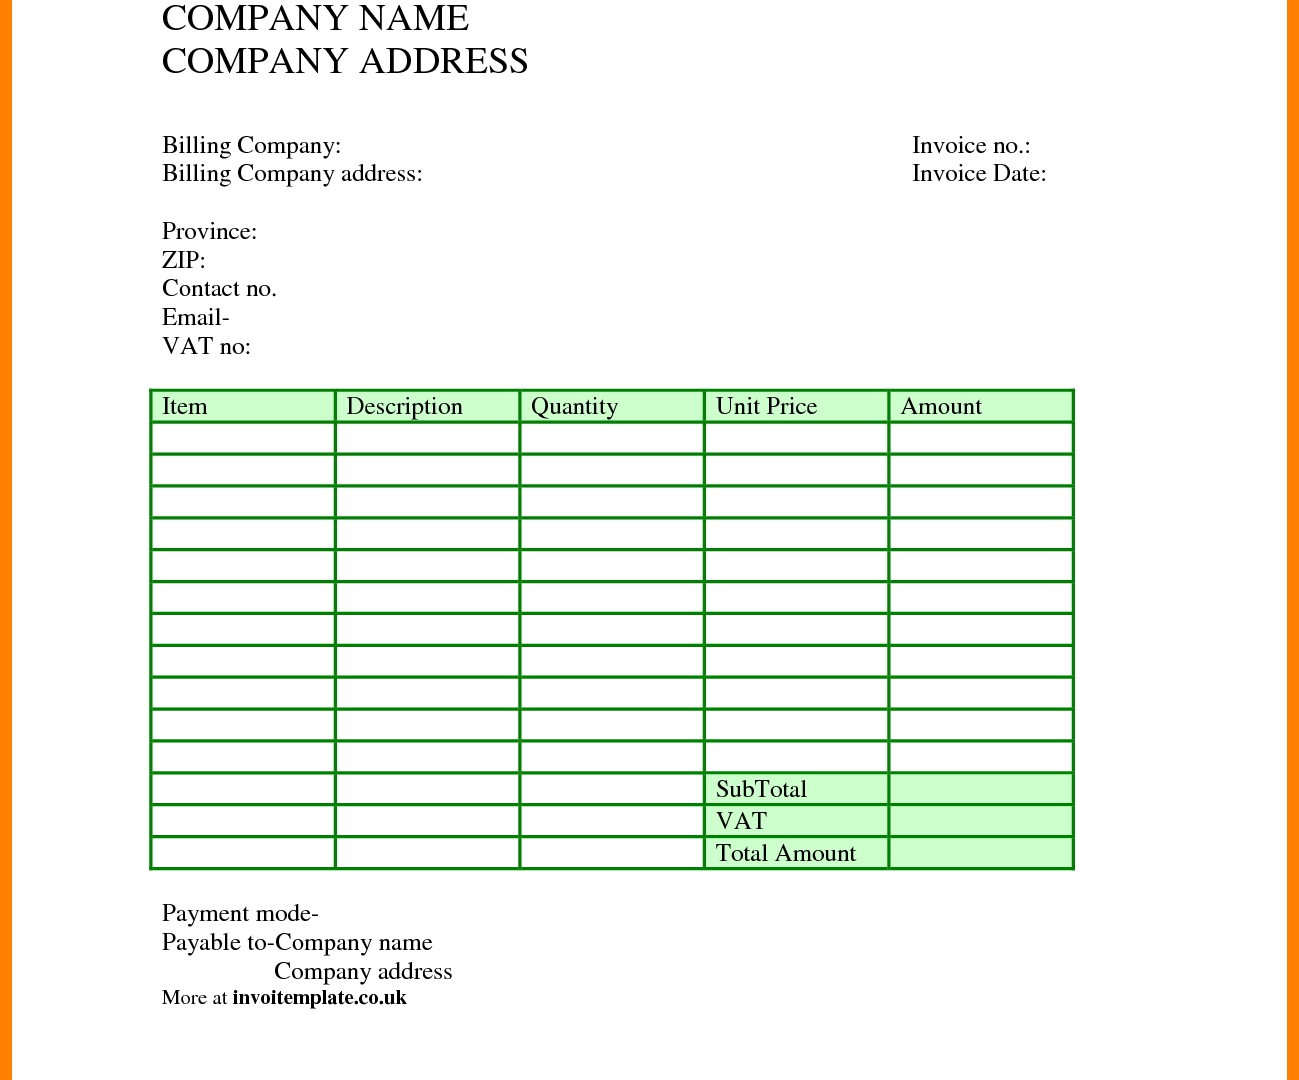 44 Standard Self Employed Consultant Invoice Template Uk Formating with Self Employed Consultant Invoice Template Uk